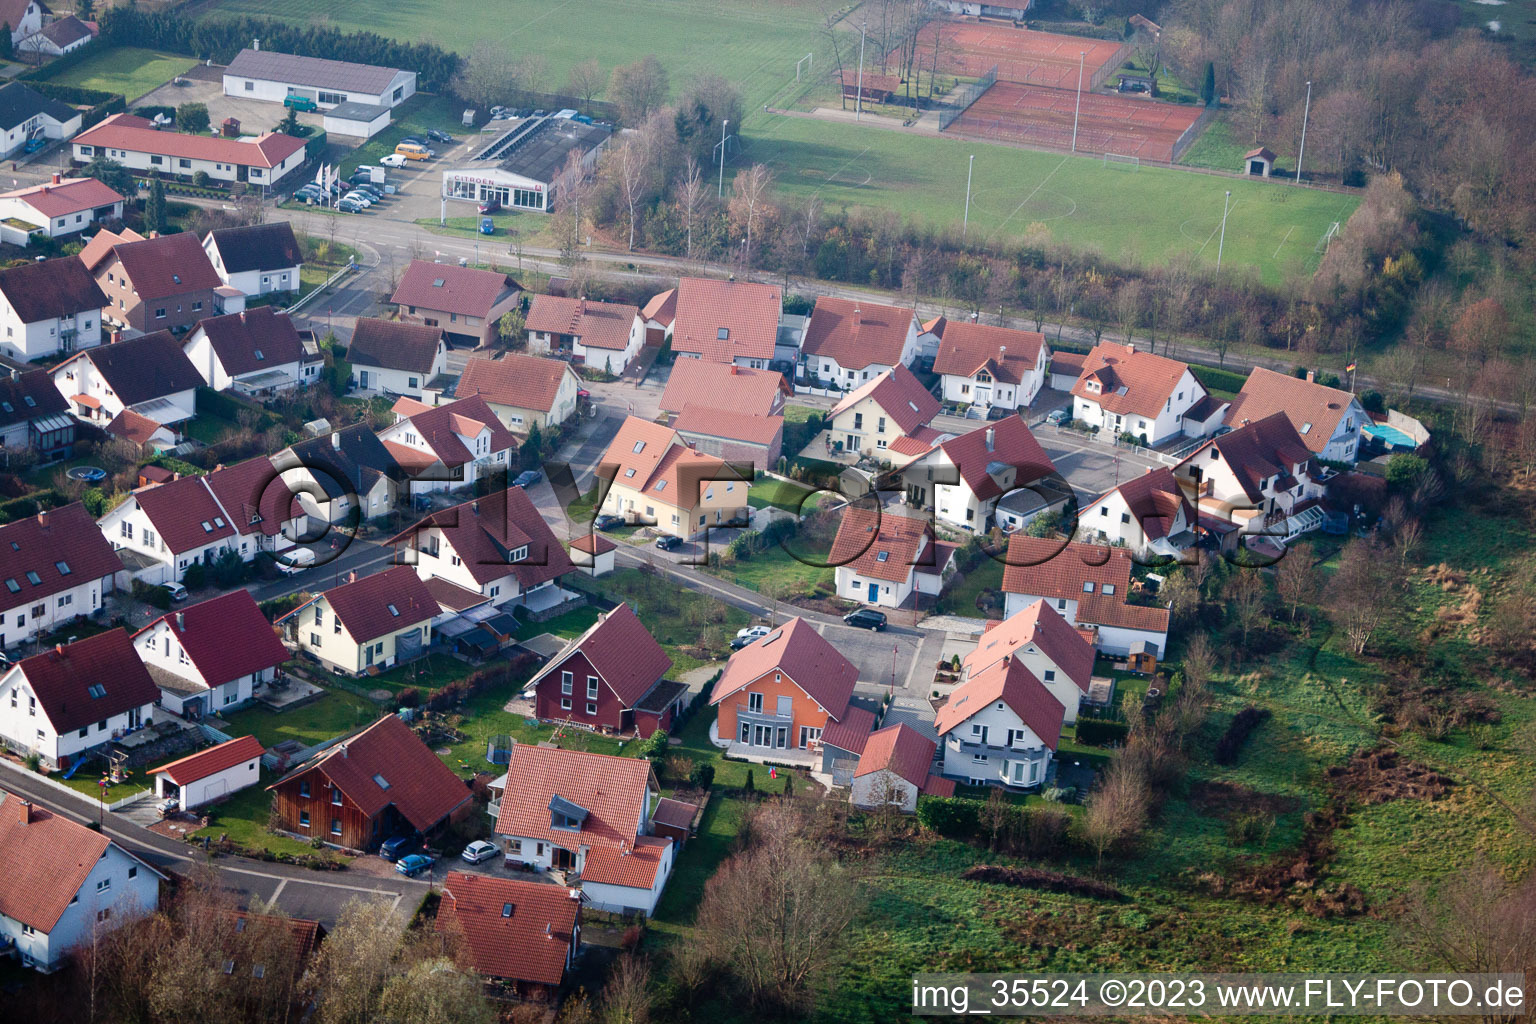 Aerial view of New development area in Winden in the state Rhineland-Palatinate, Germany